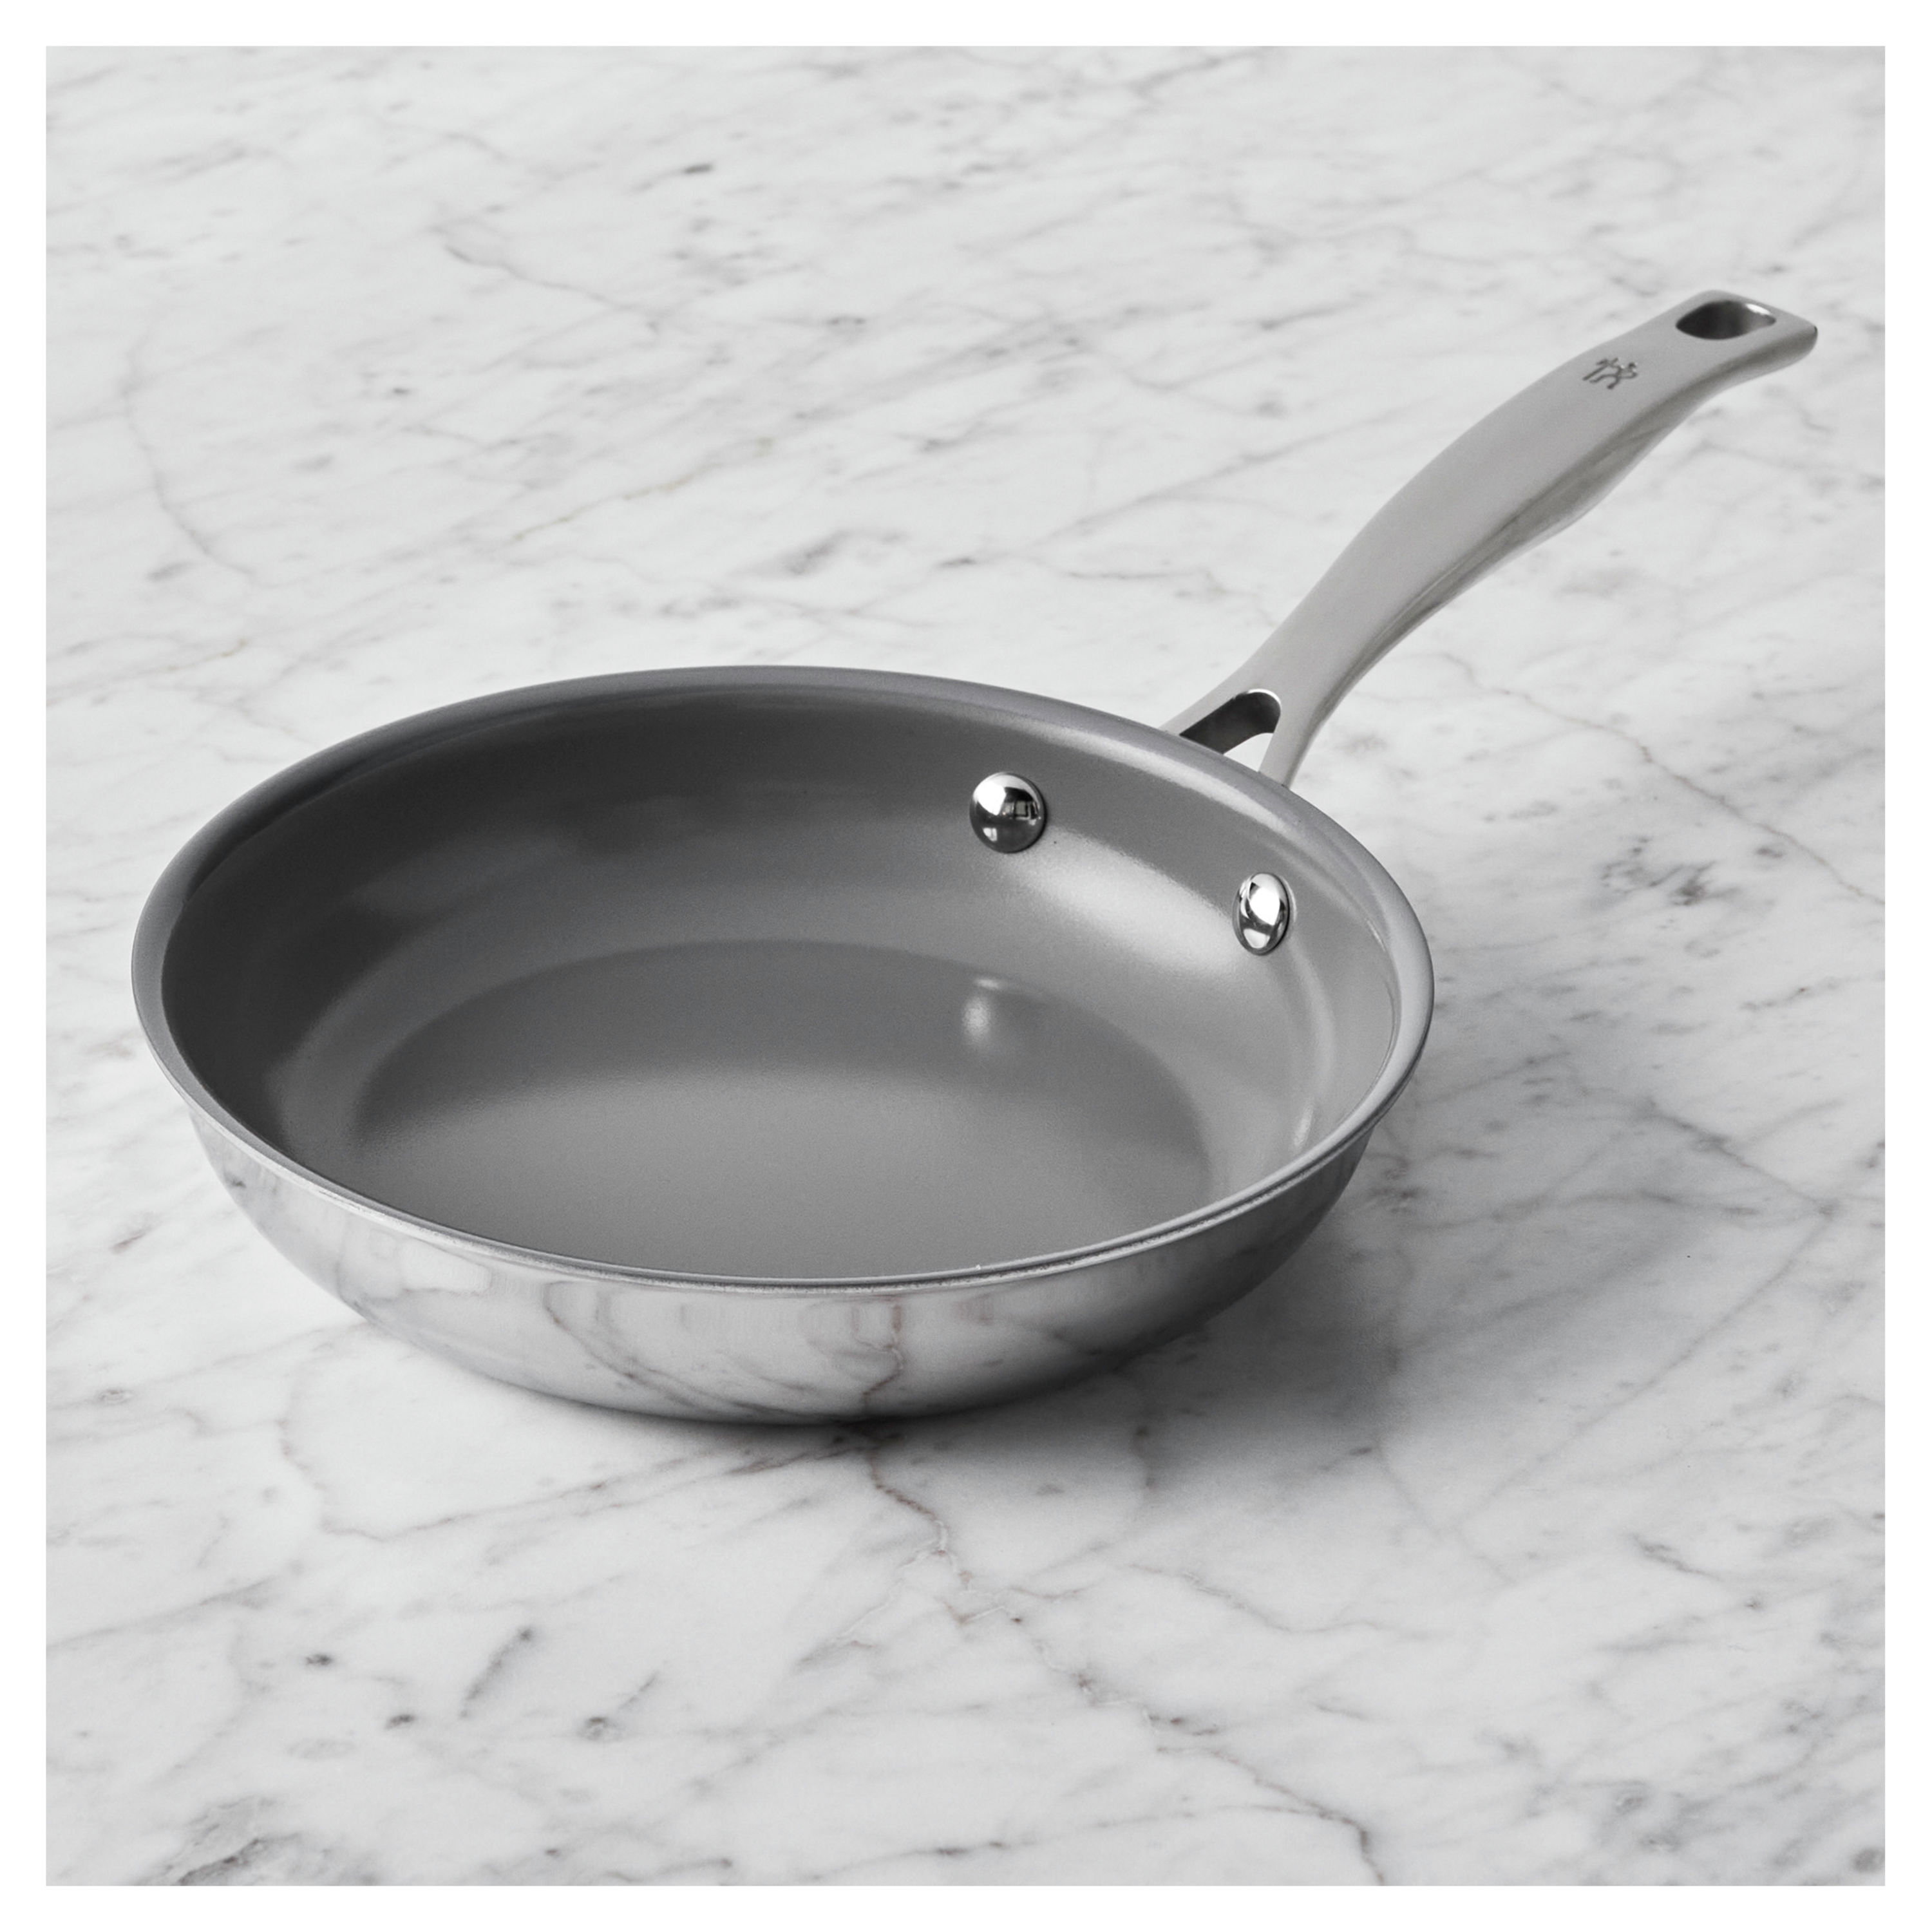 French Classic Stainless Non-stick Fry Pan, Silver, 8